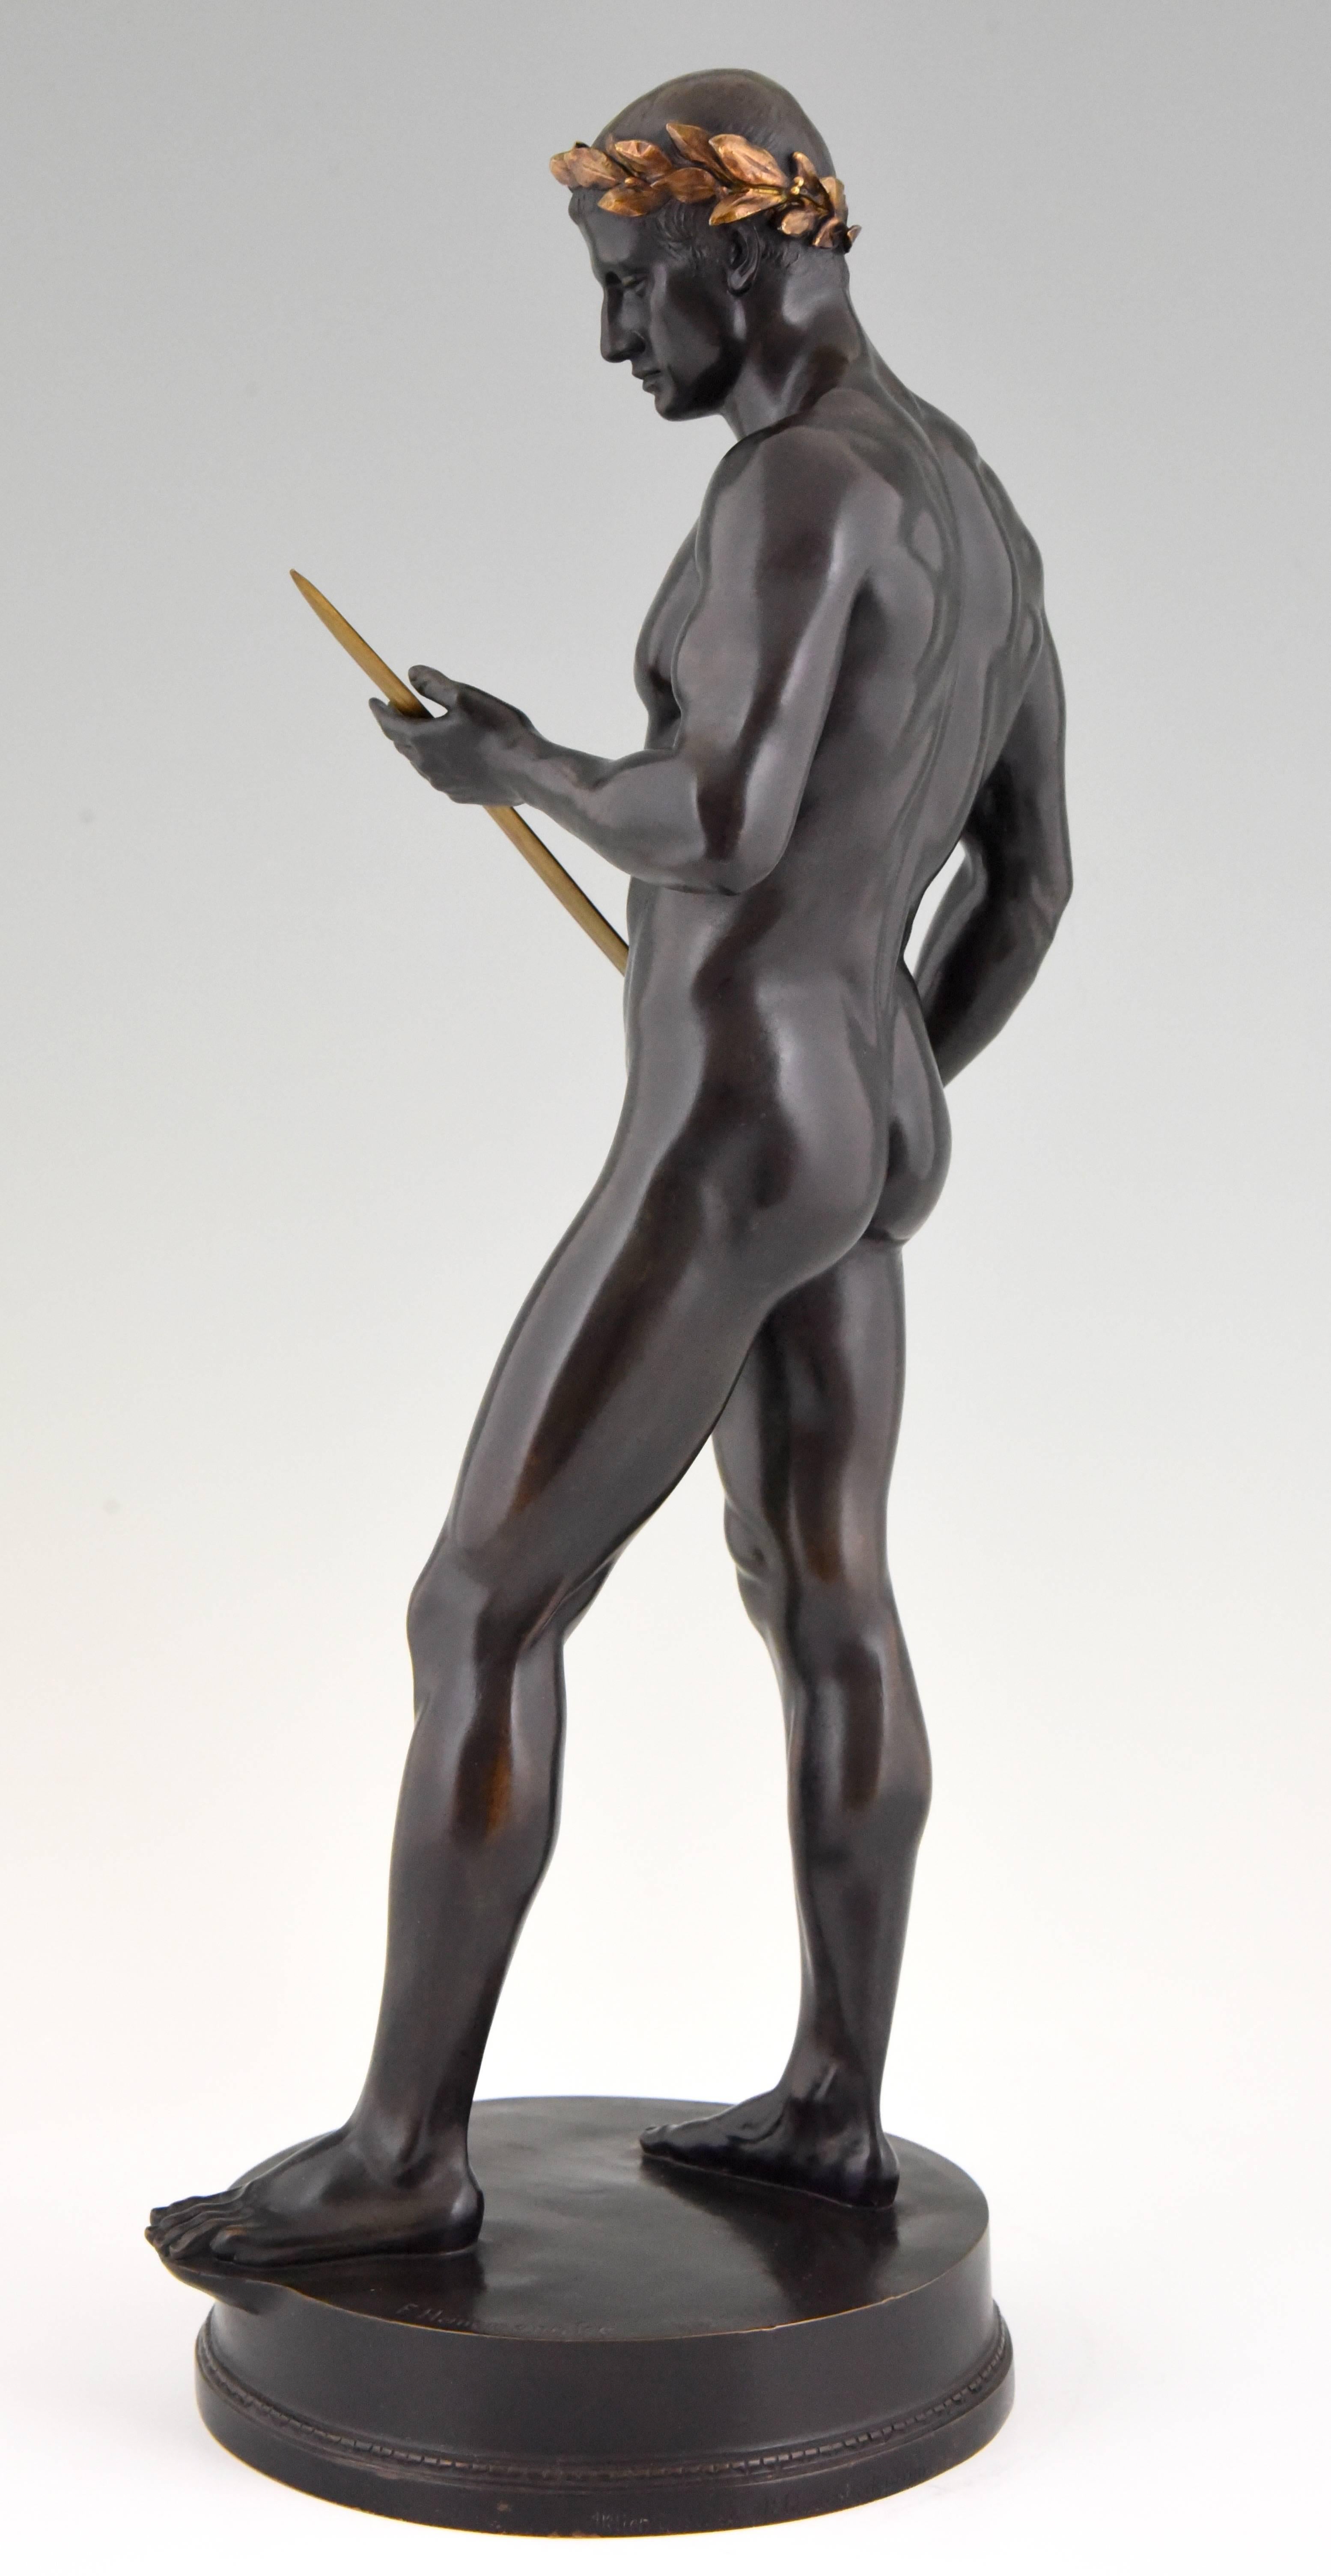 Patinated Antique Bronze Sculpture Male Nude with Sword by Fritz Heinemann, 1890